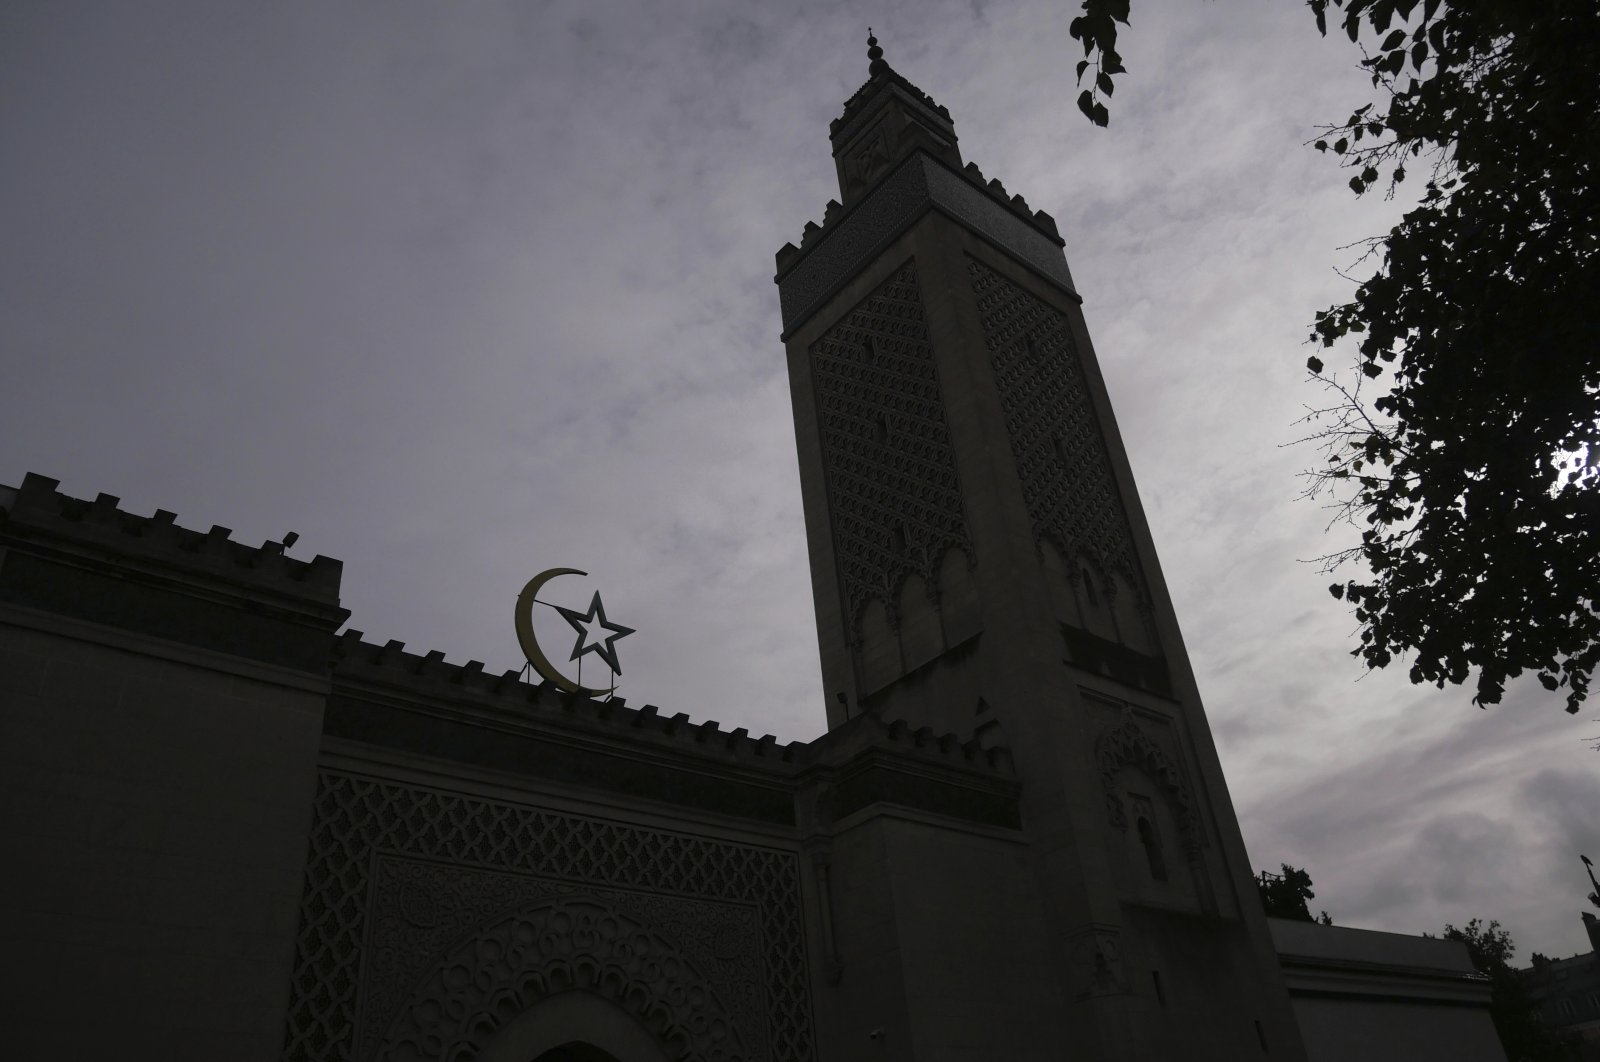 This Oct. 29, 2020 file photo shows the Paris mosque. A spotlight of suspicion encircled Muslims again even before the latest acts of extremist violence, including two beheadings. (AP Photo)